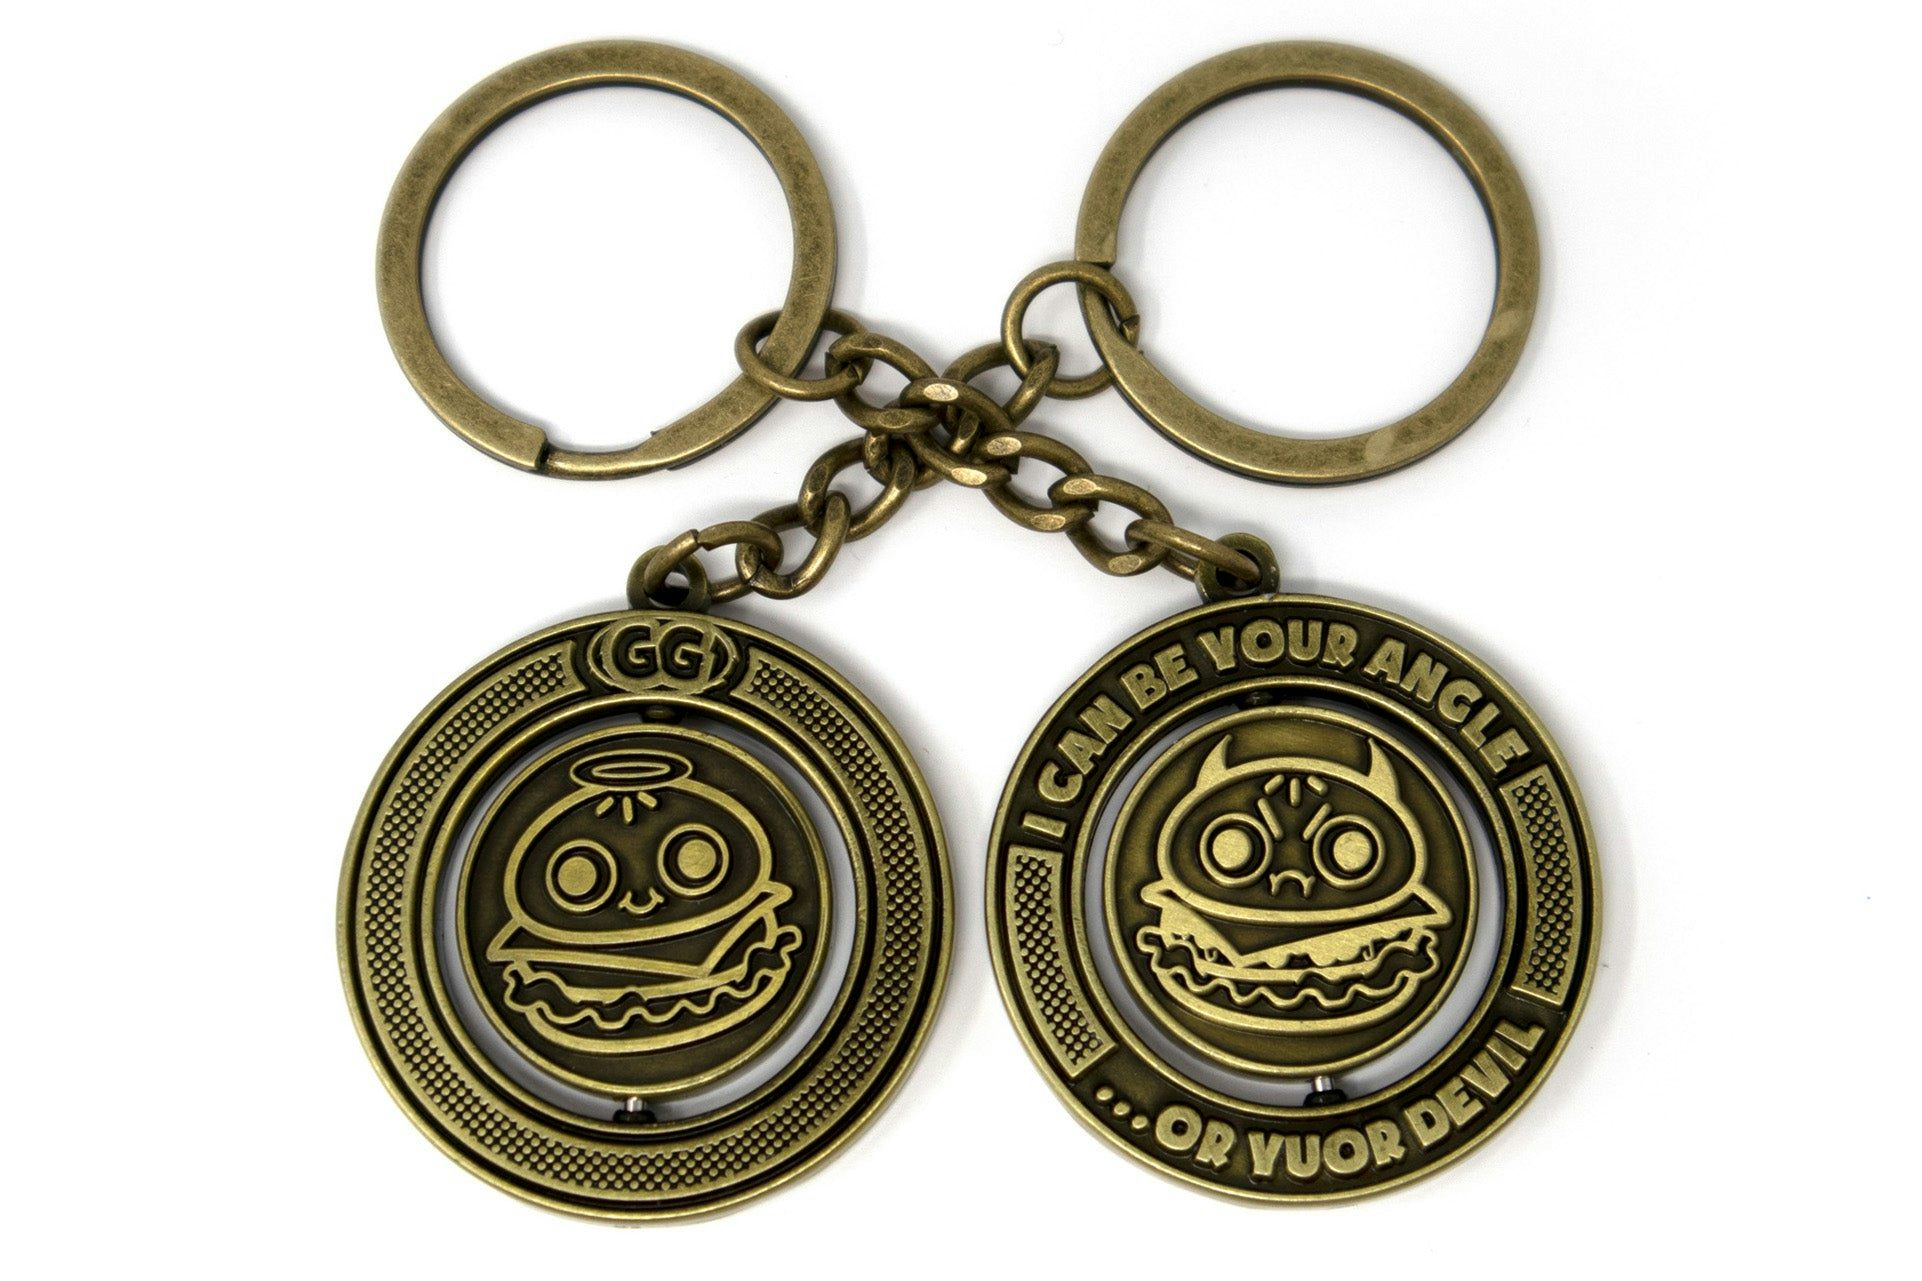 "I Can Be Your Angle..." Burgie Spinning Keychain